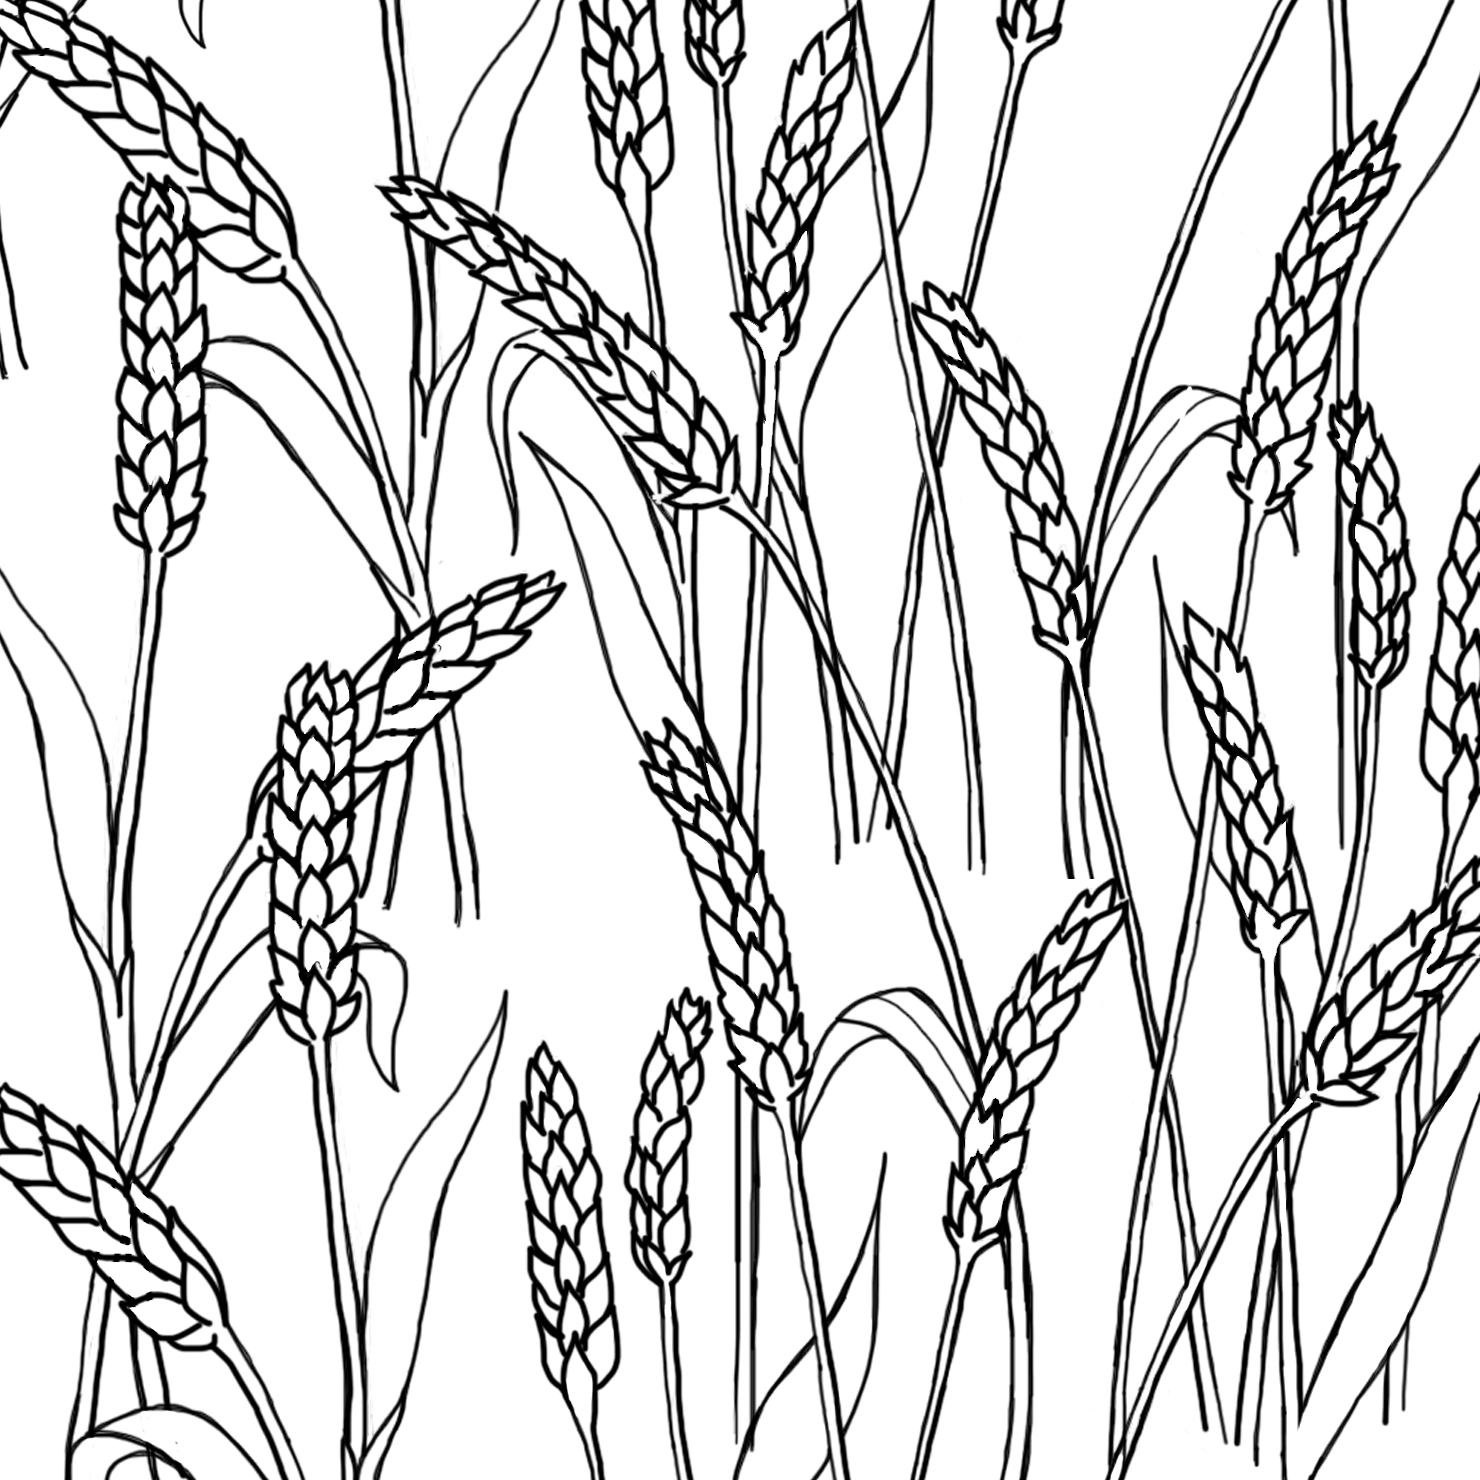 Psalm Coloring Pages For Fall - Psalm 33:4 - Underbart skapad